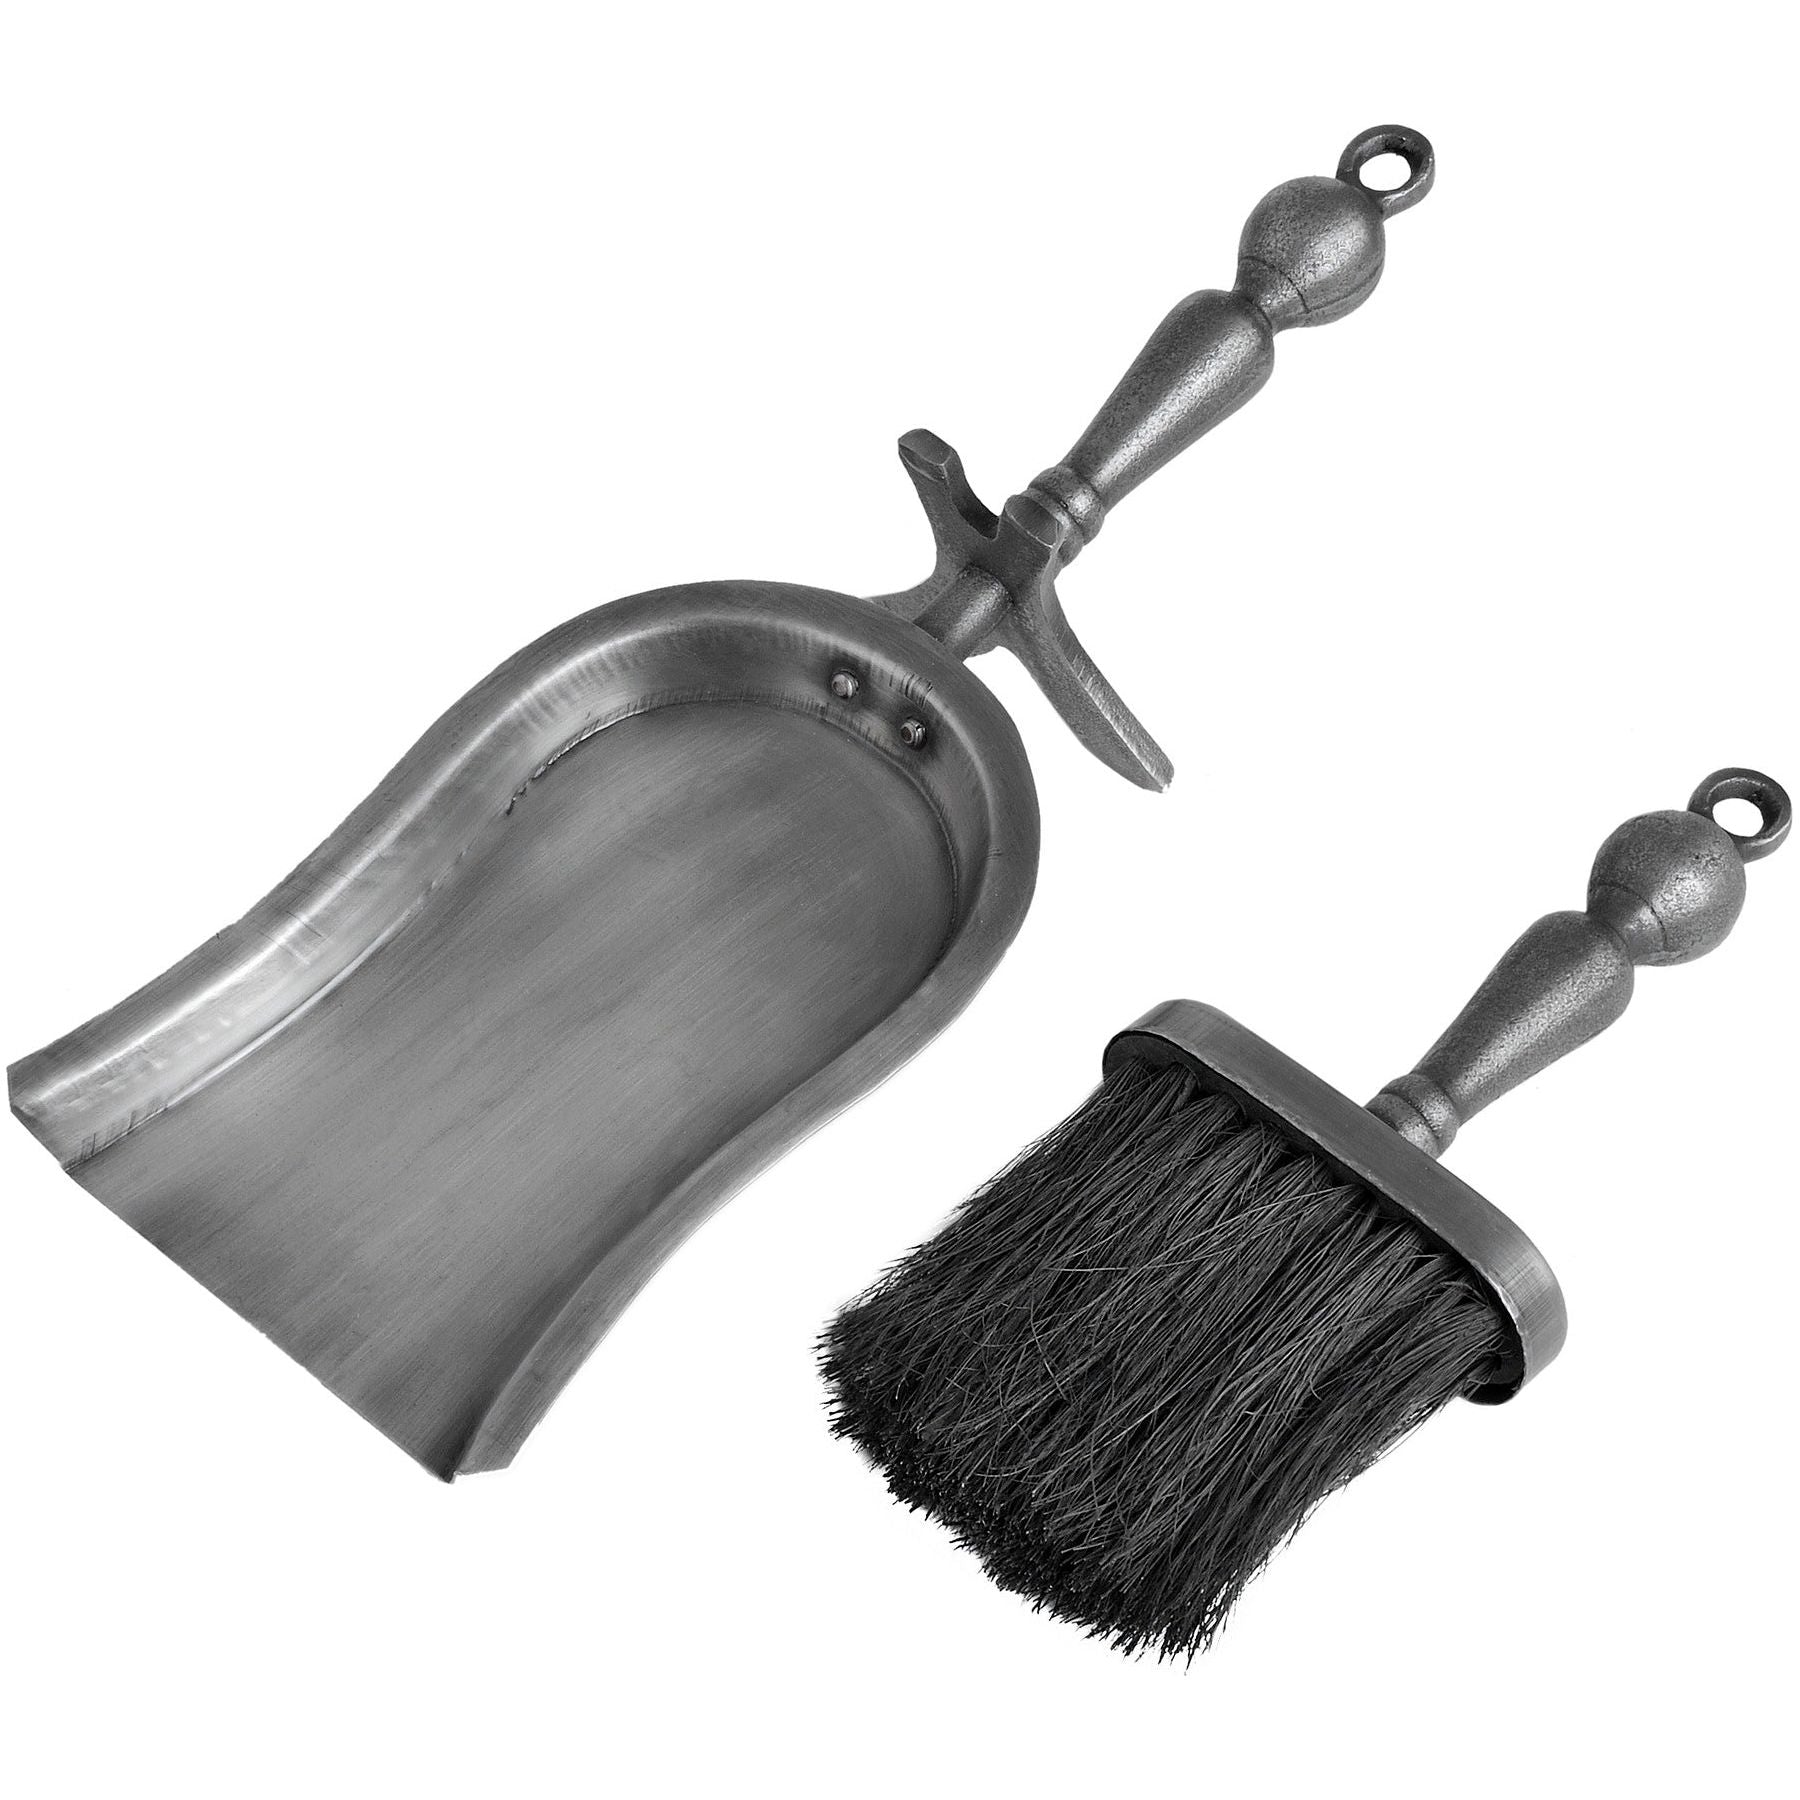 Hearth Tidy Set in Antique Pewter Effect Finish - Ashton and Finch